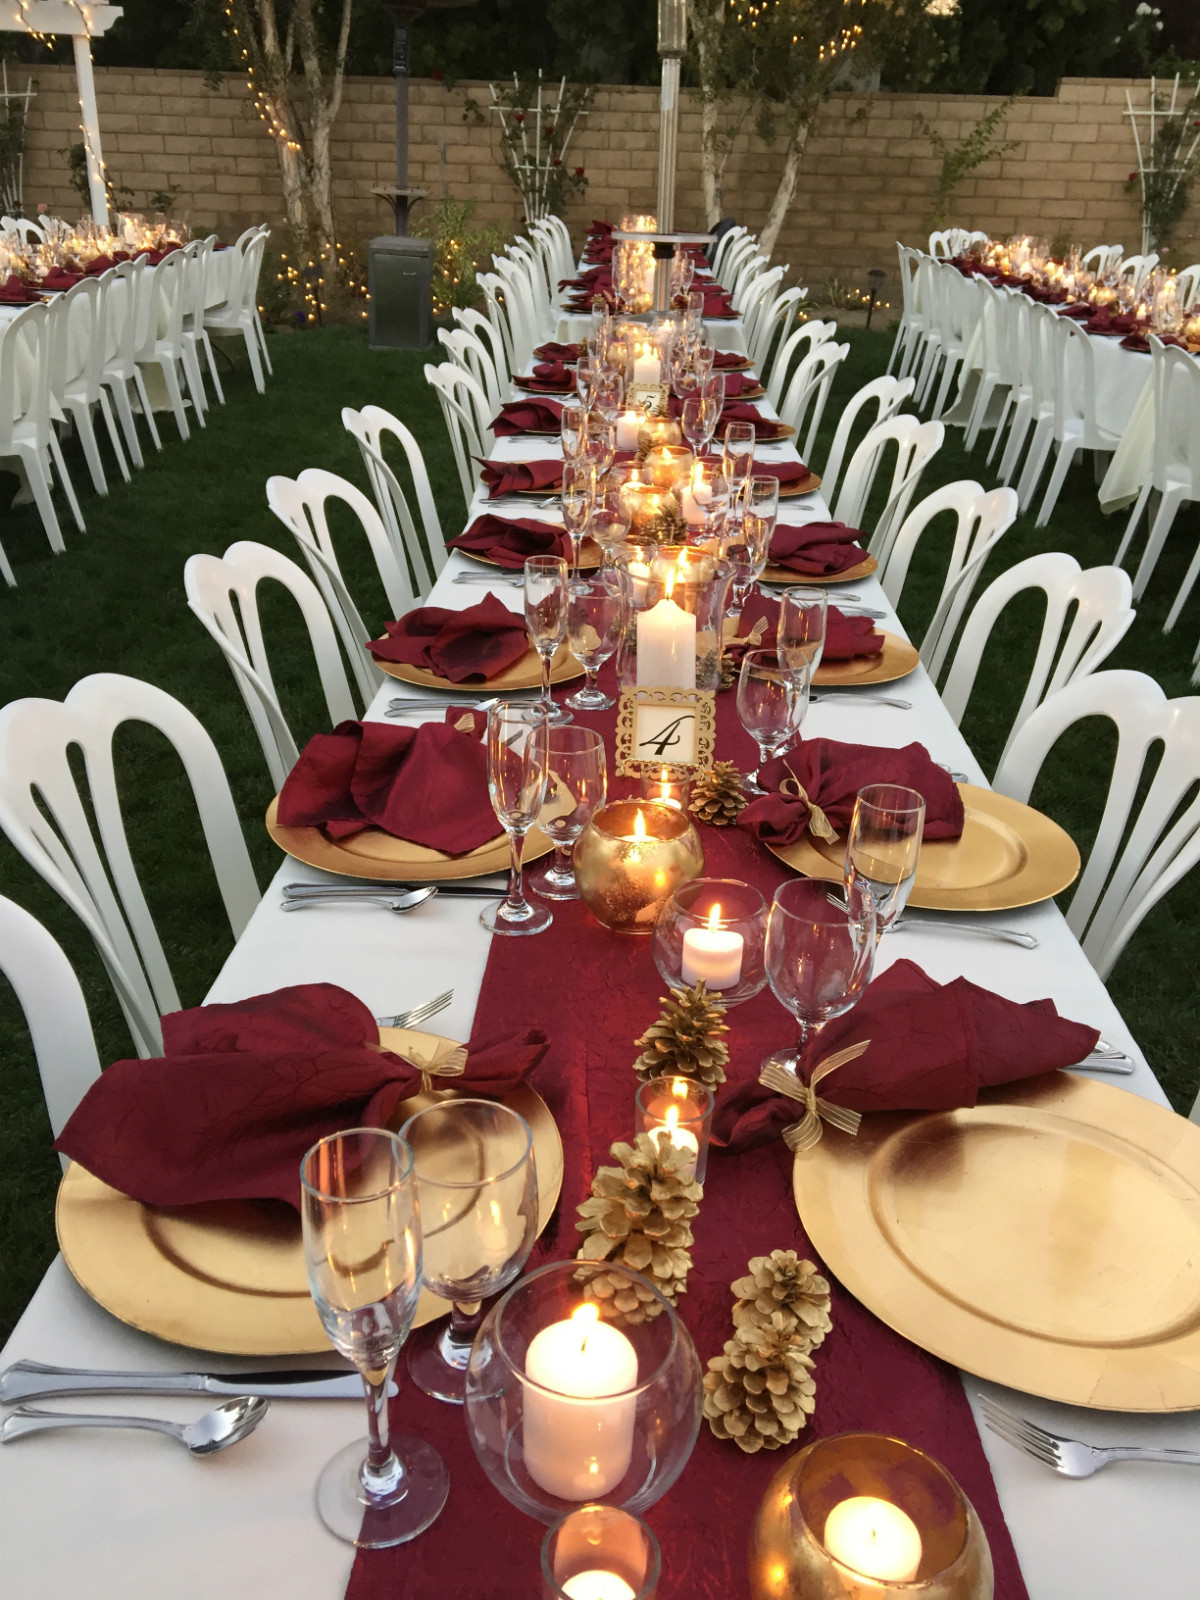 Wedding Reception Colors
 Burgundy Table Runners & Napkins